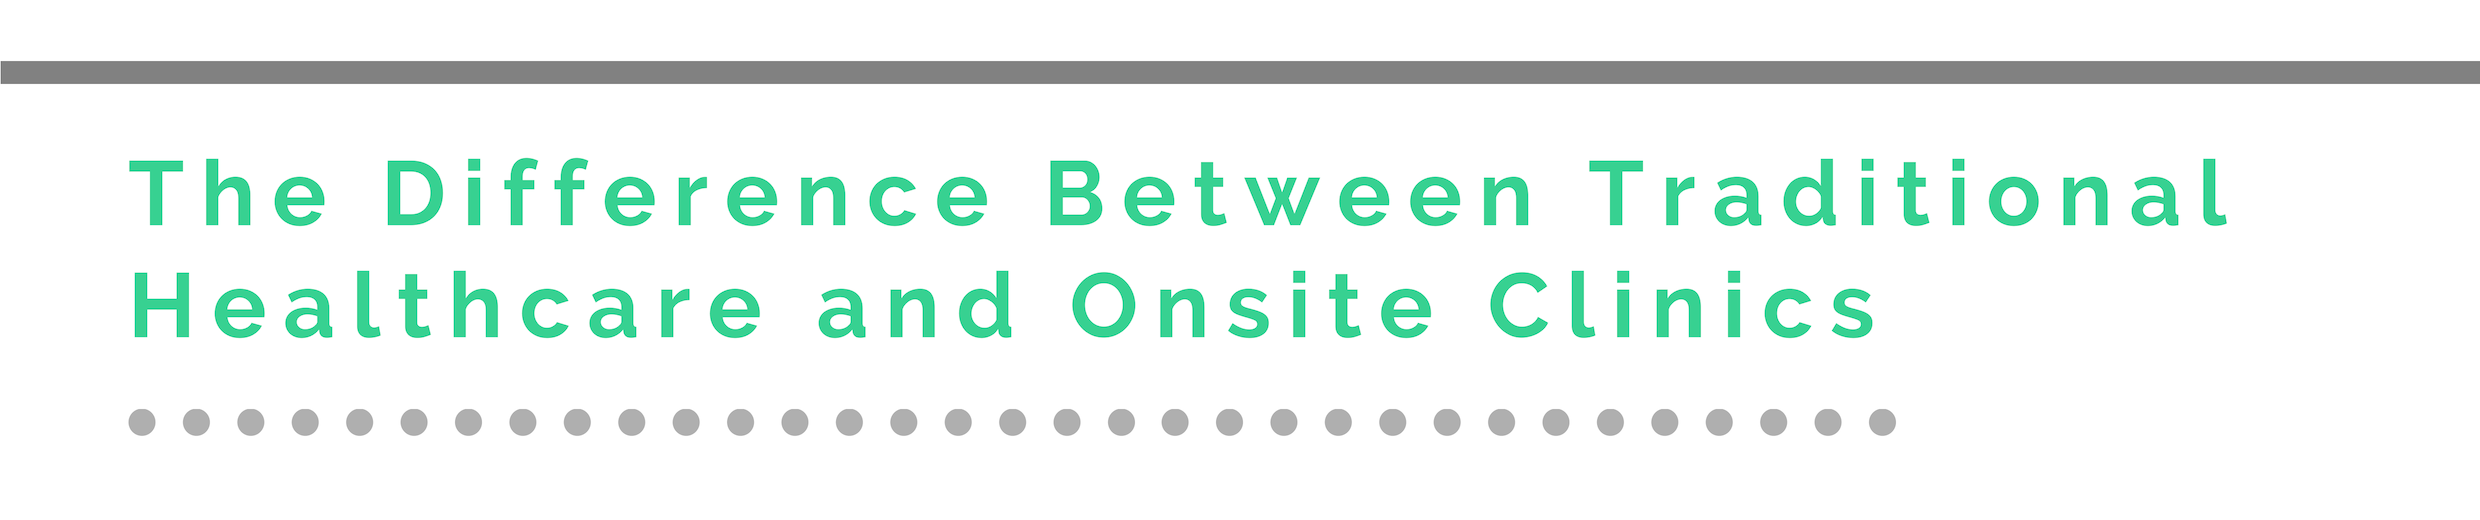 Difference Between Traditional Healthcare and Onsite Clinics